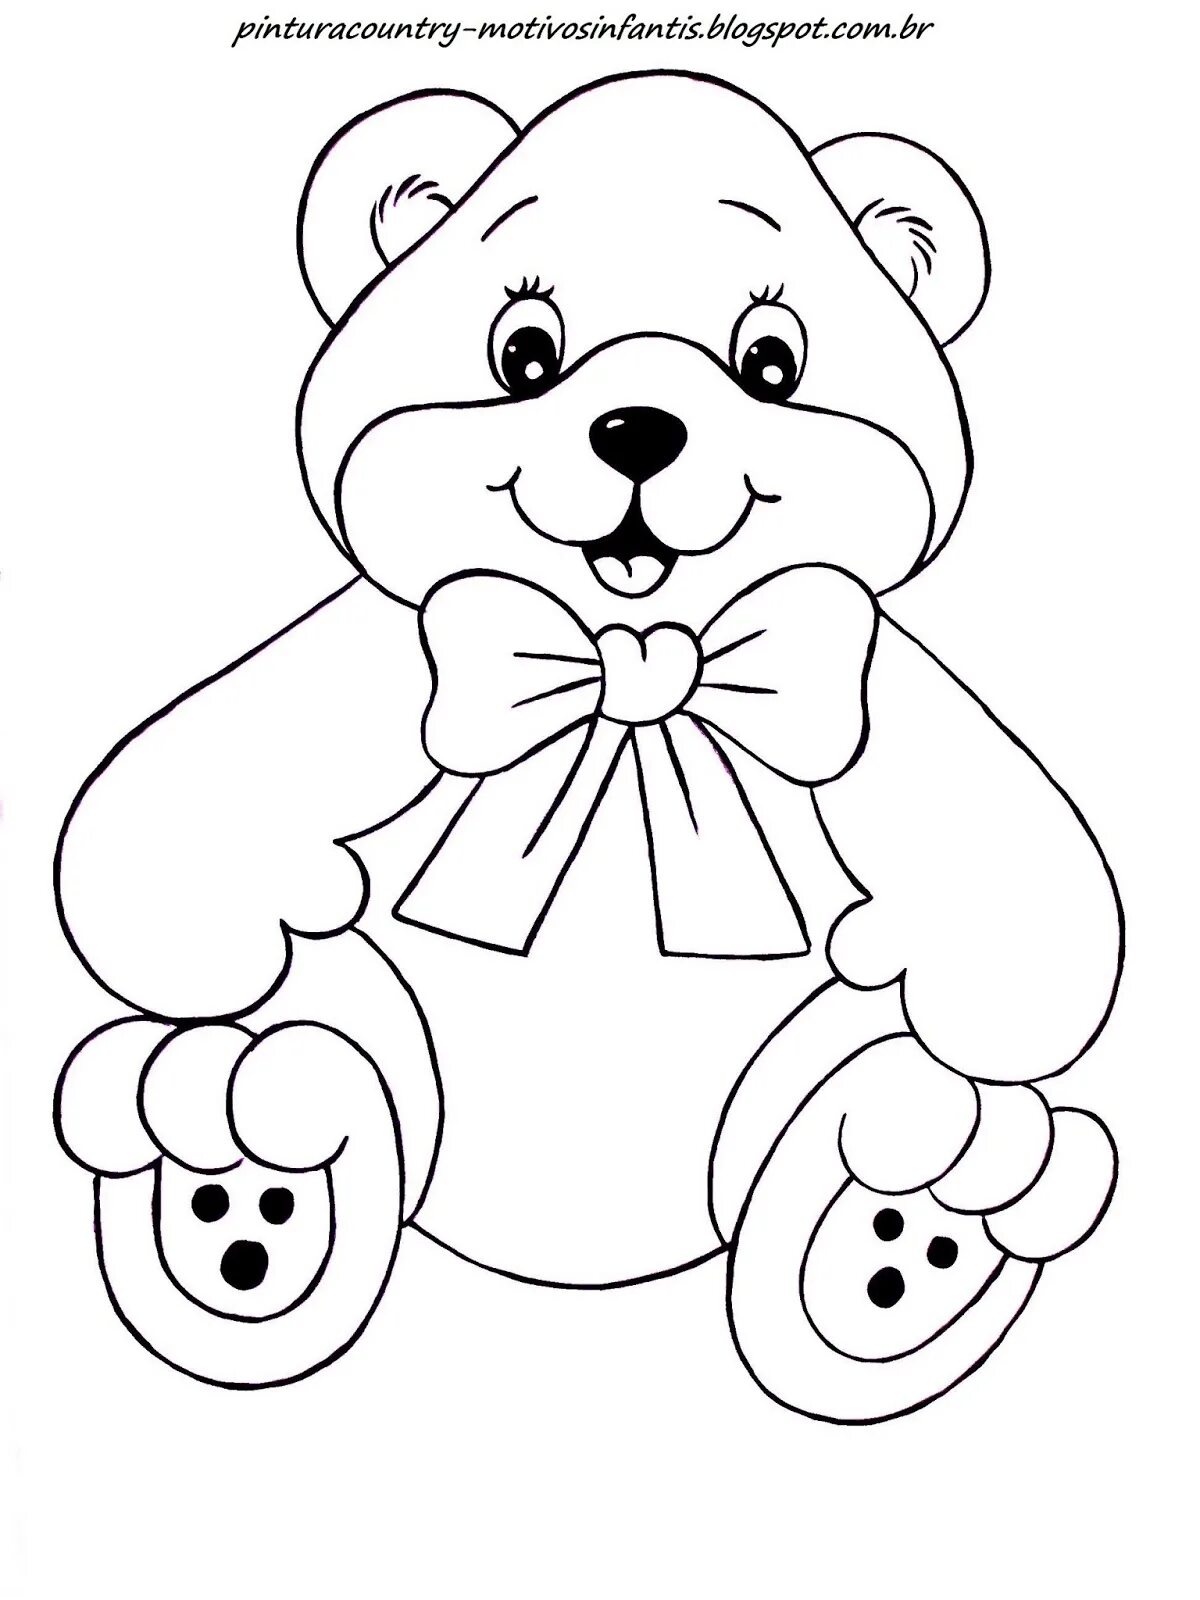 Coloring page glamor teddy bear with a bow